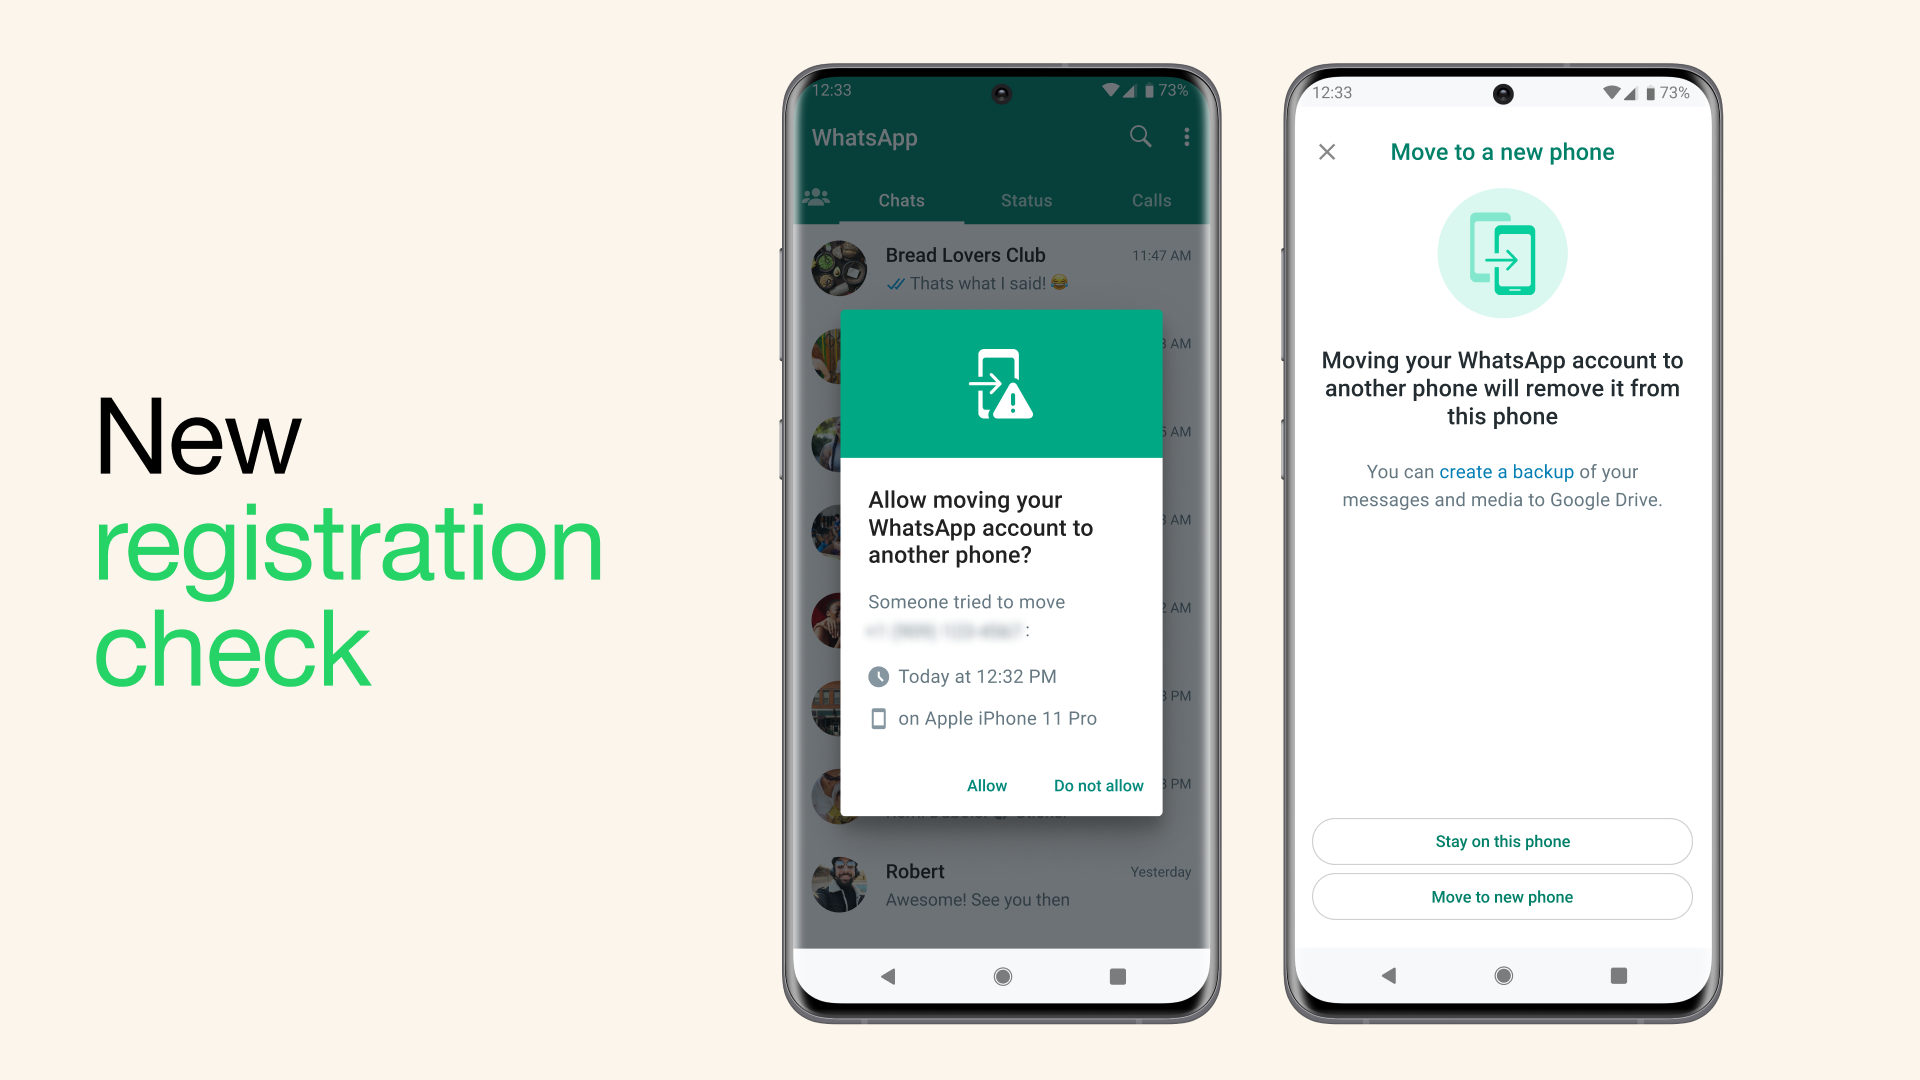 WhatsApp Beta Update Unlocks New Security Features: Face ID, Passcodes, and More for Android Users